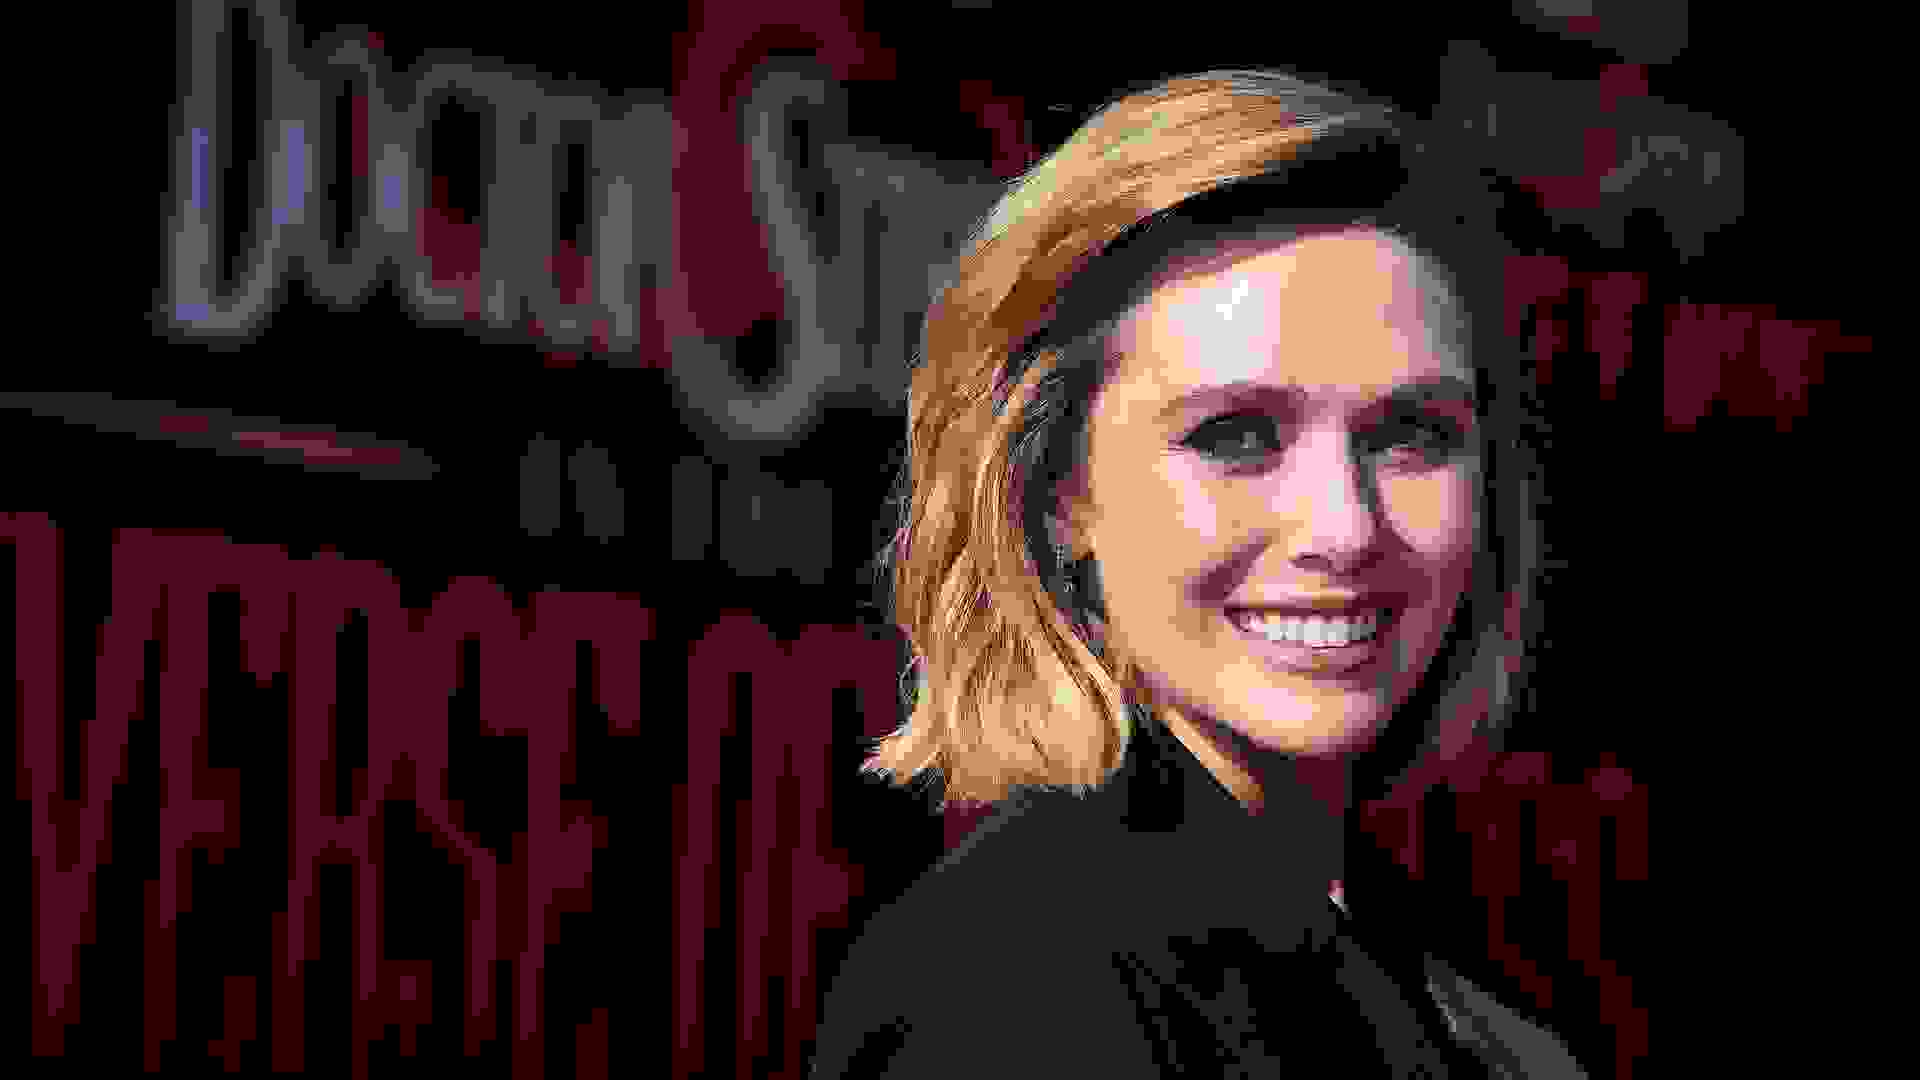 Mandatory Credit: Photo by Jordan Strauss/Invision/AP/Shutterstock (12921747h)Cast member Elizabeth Olsen arrives at the Los Angeles premiere of "Doctor Strange in the Multiverse of Madness," on at El Capitan TheatreLA Premiere of "Doctor Strange in the Multiverse of Madness", Los Angeles, United States - 02 May 2022.